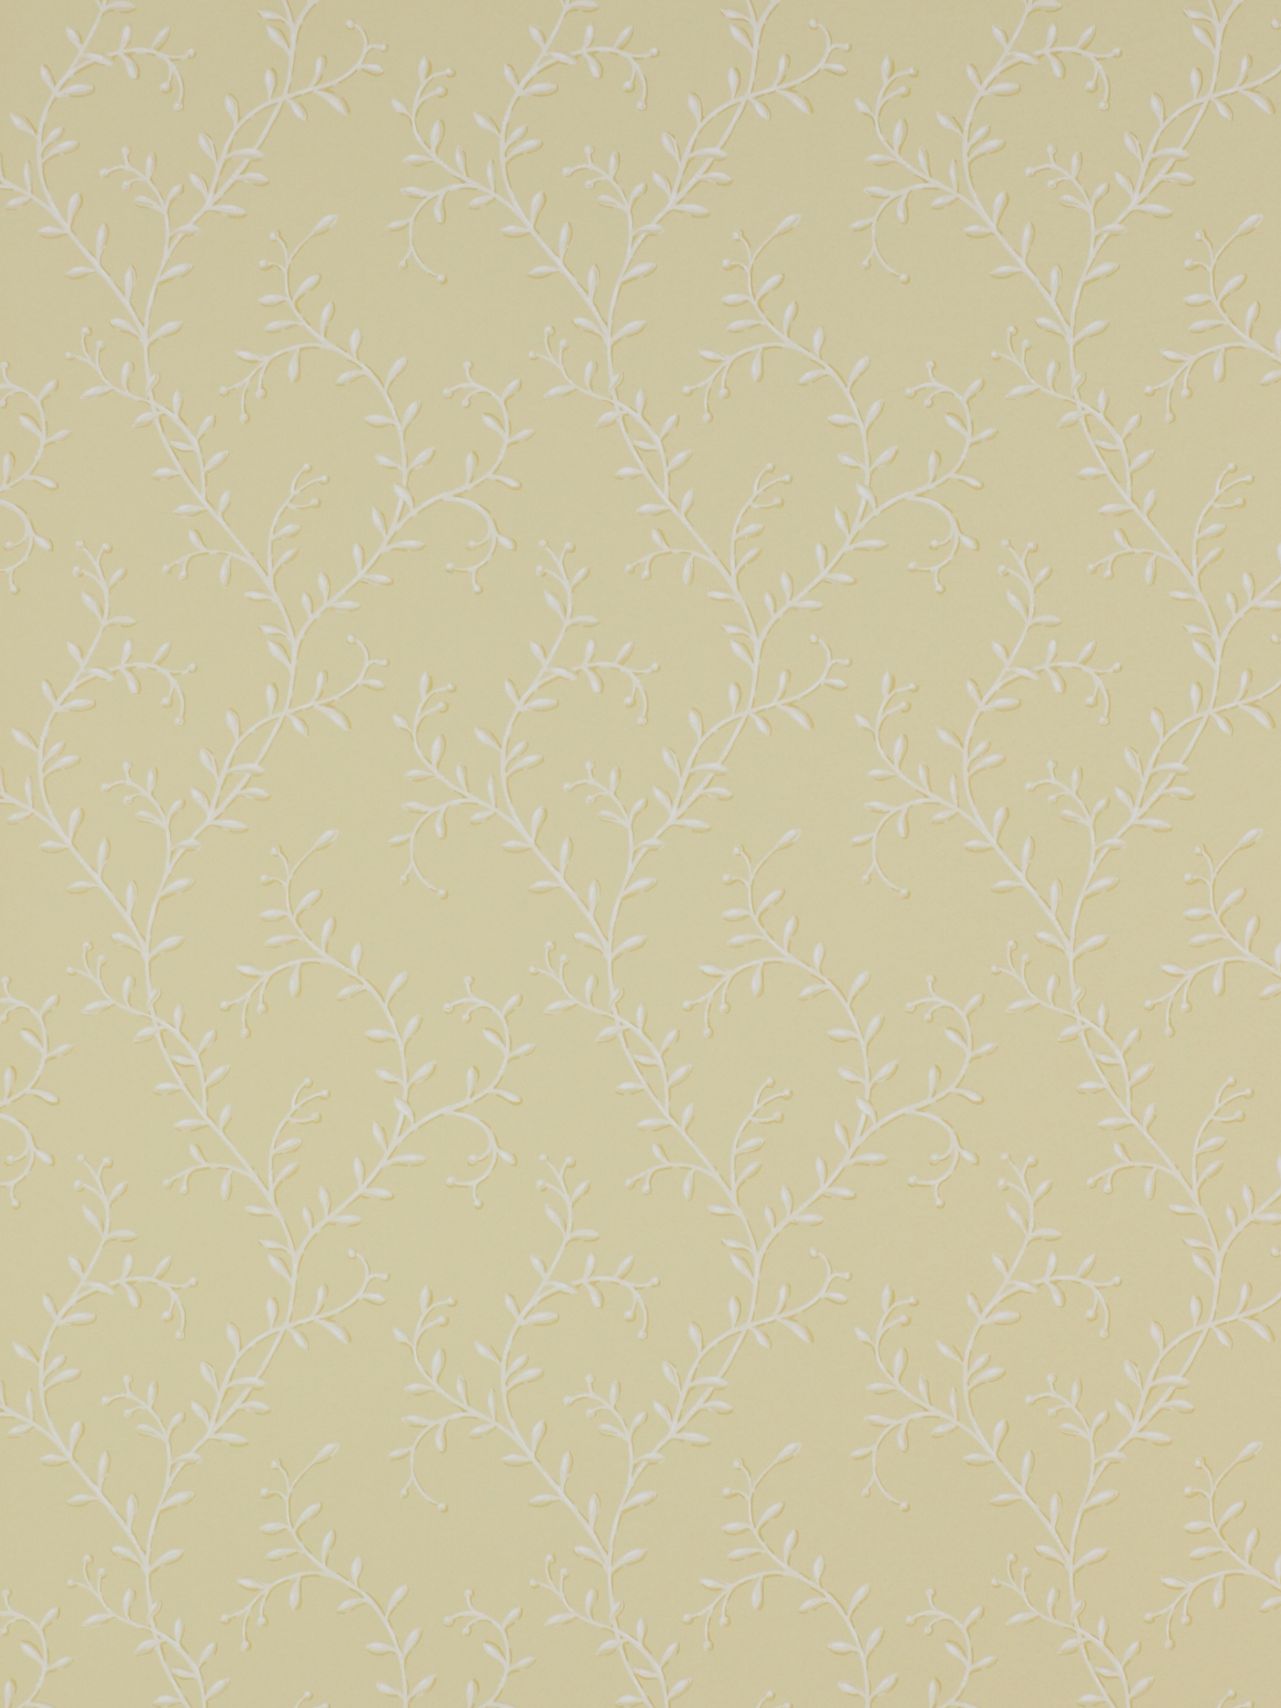 Colefax and Fowler Leafberry Wallpaper, 07137/03